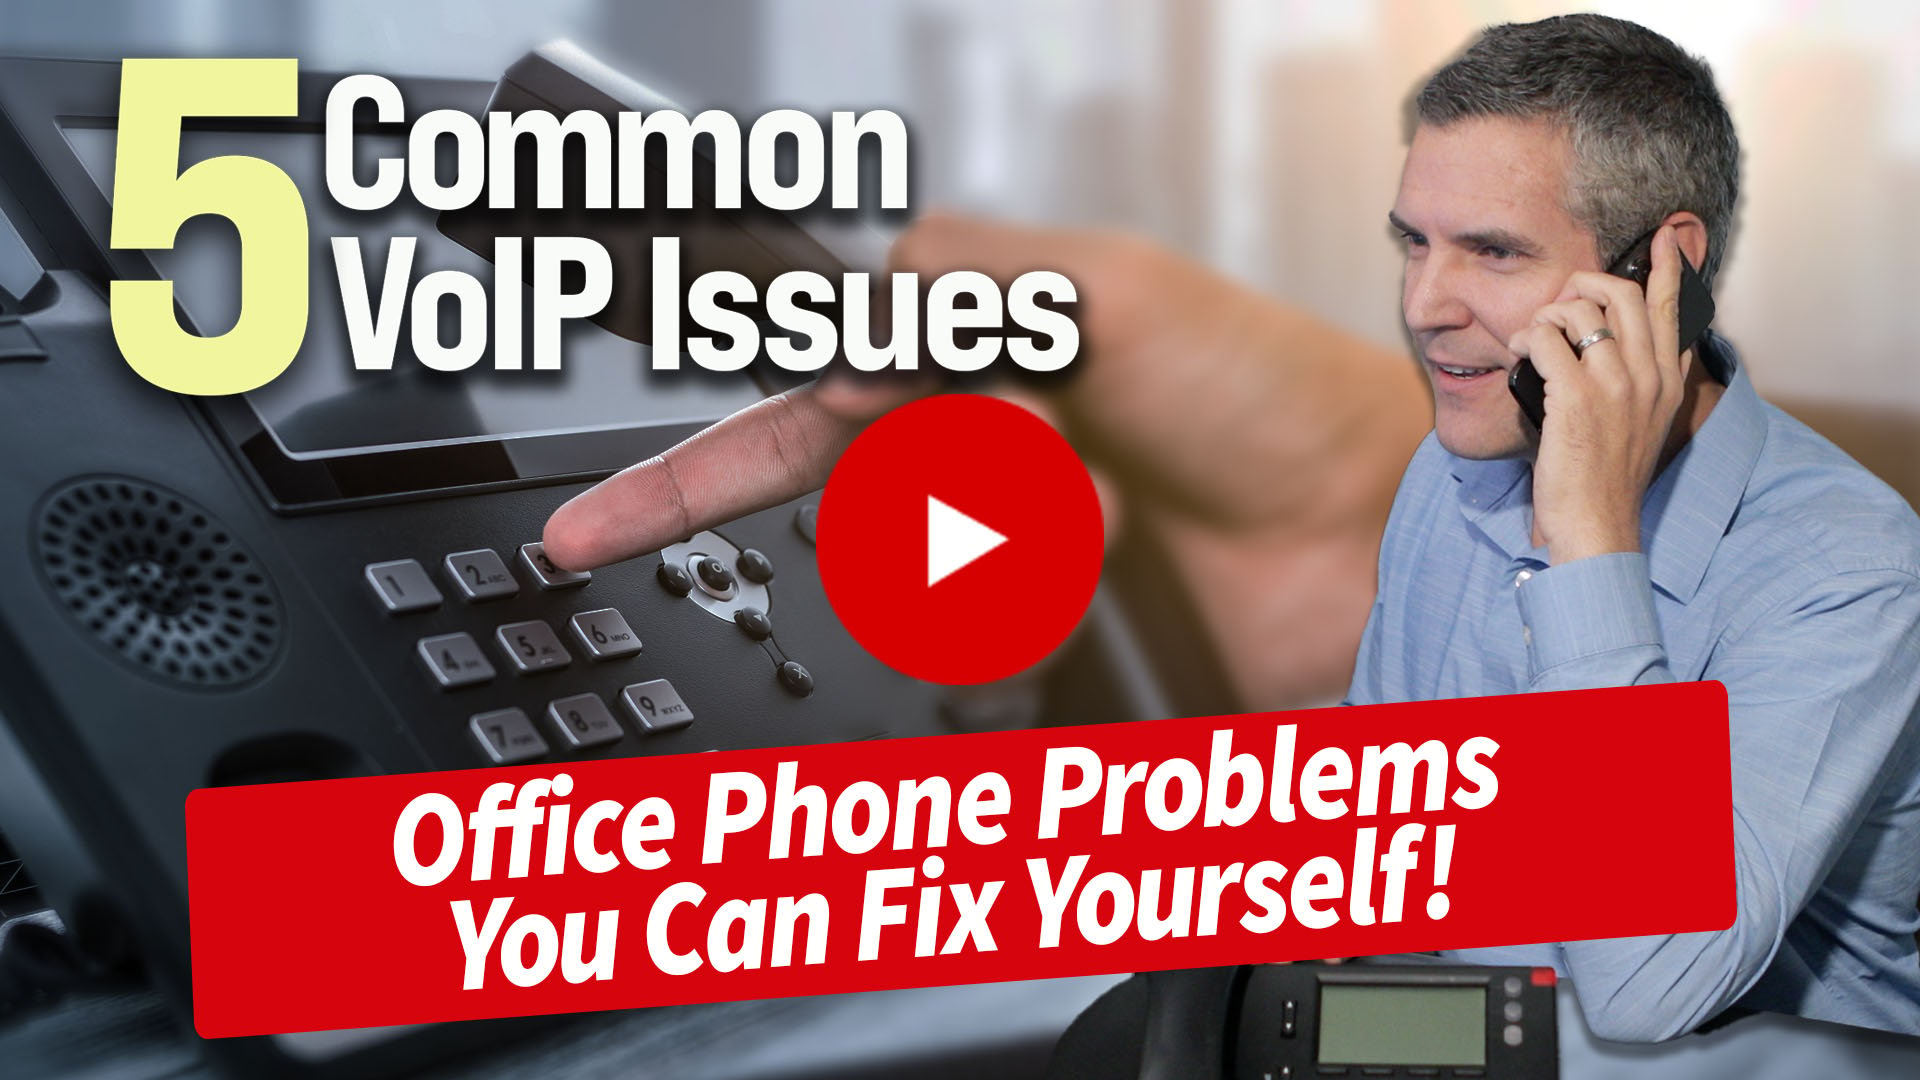 Office Phone Problems You Can Fix Yourself